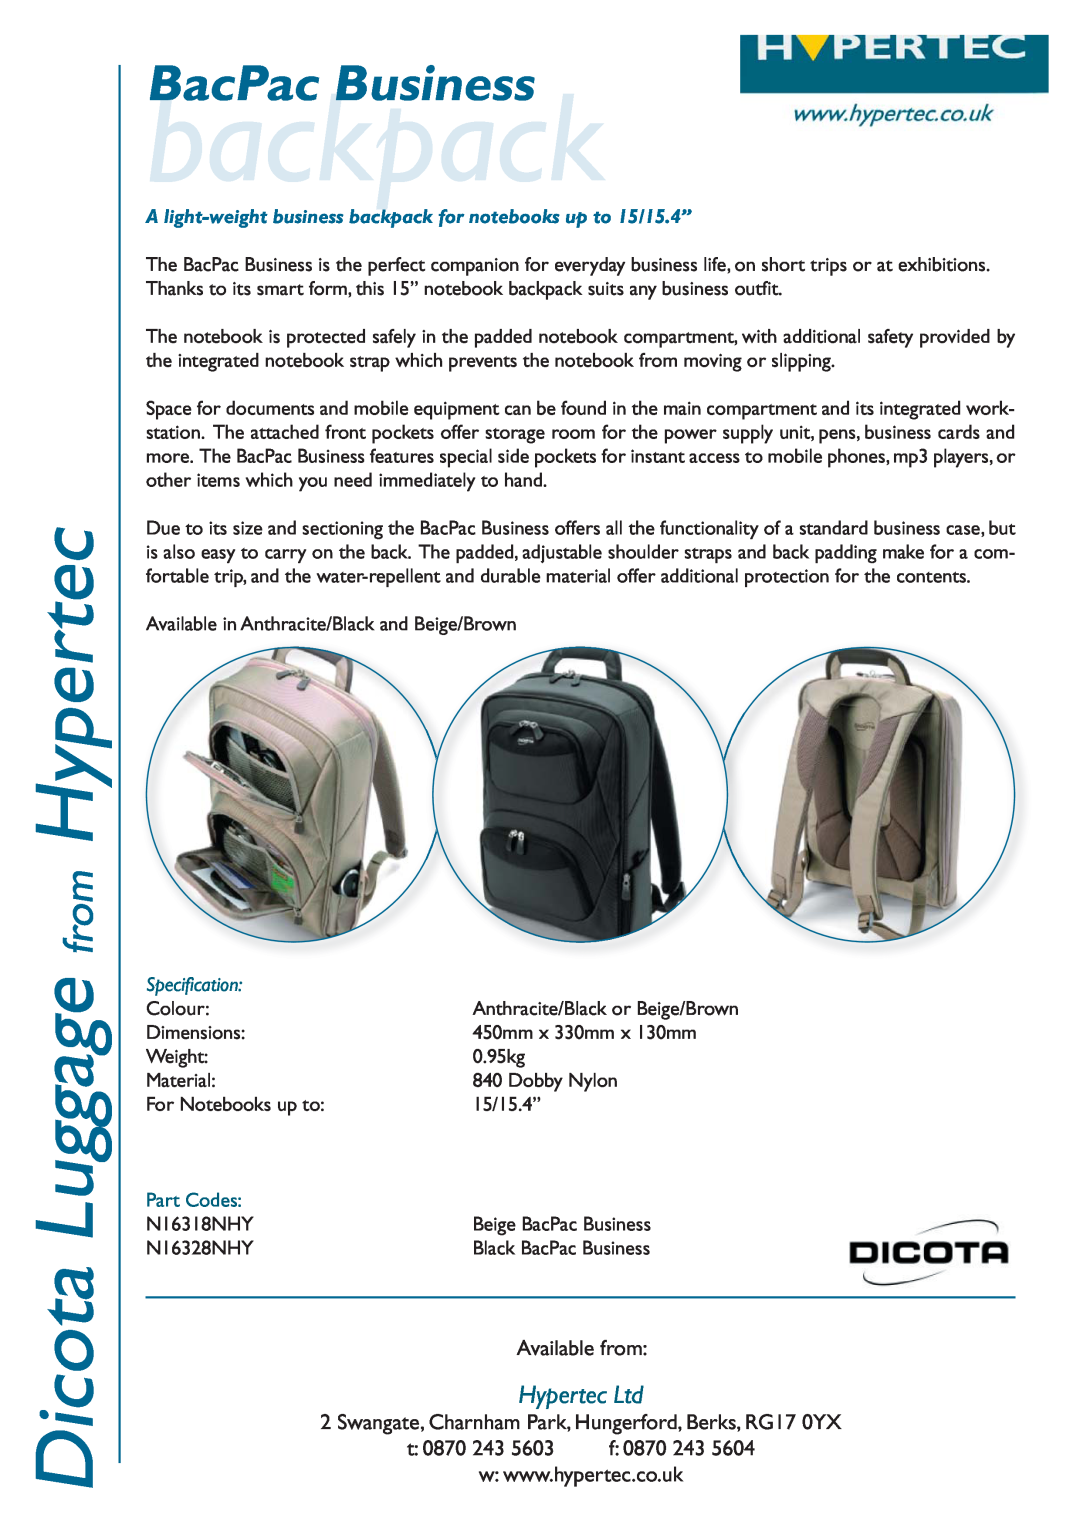 Hypertec N16318NHY dimensions backpack, Dicota Luggage from Hypertec, BacPac Business, Available from, t 0870 243 